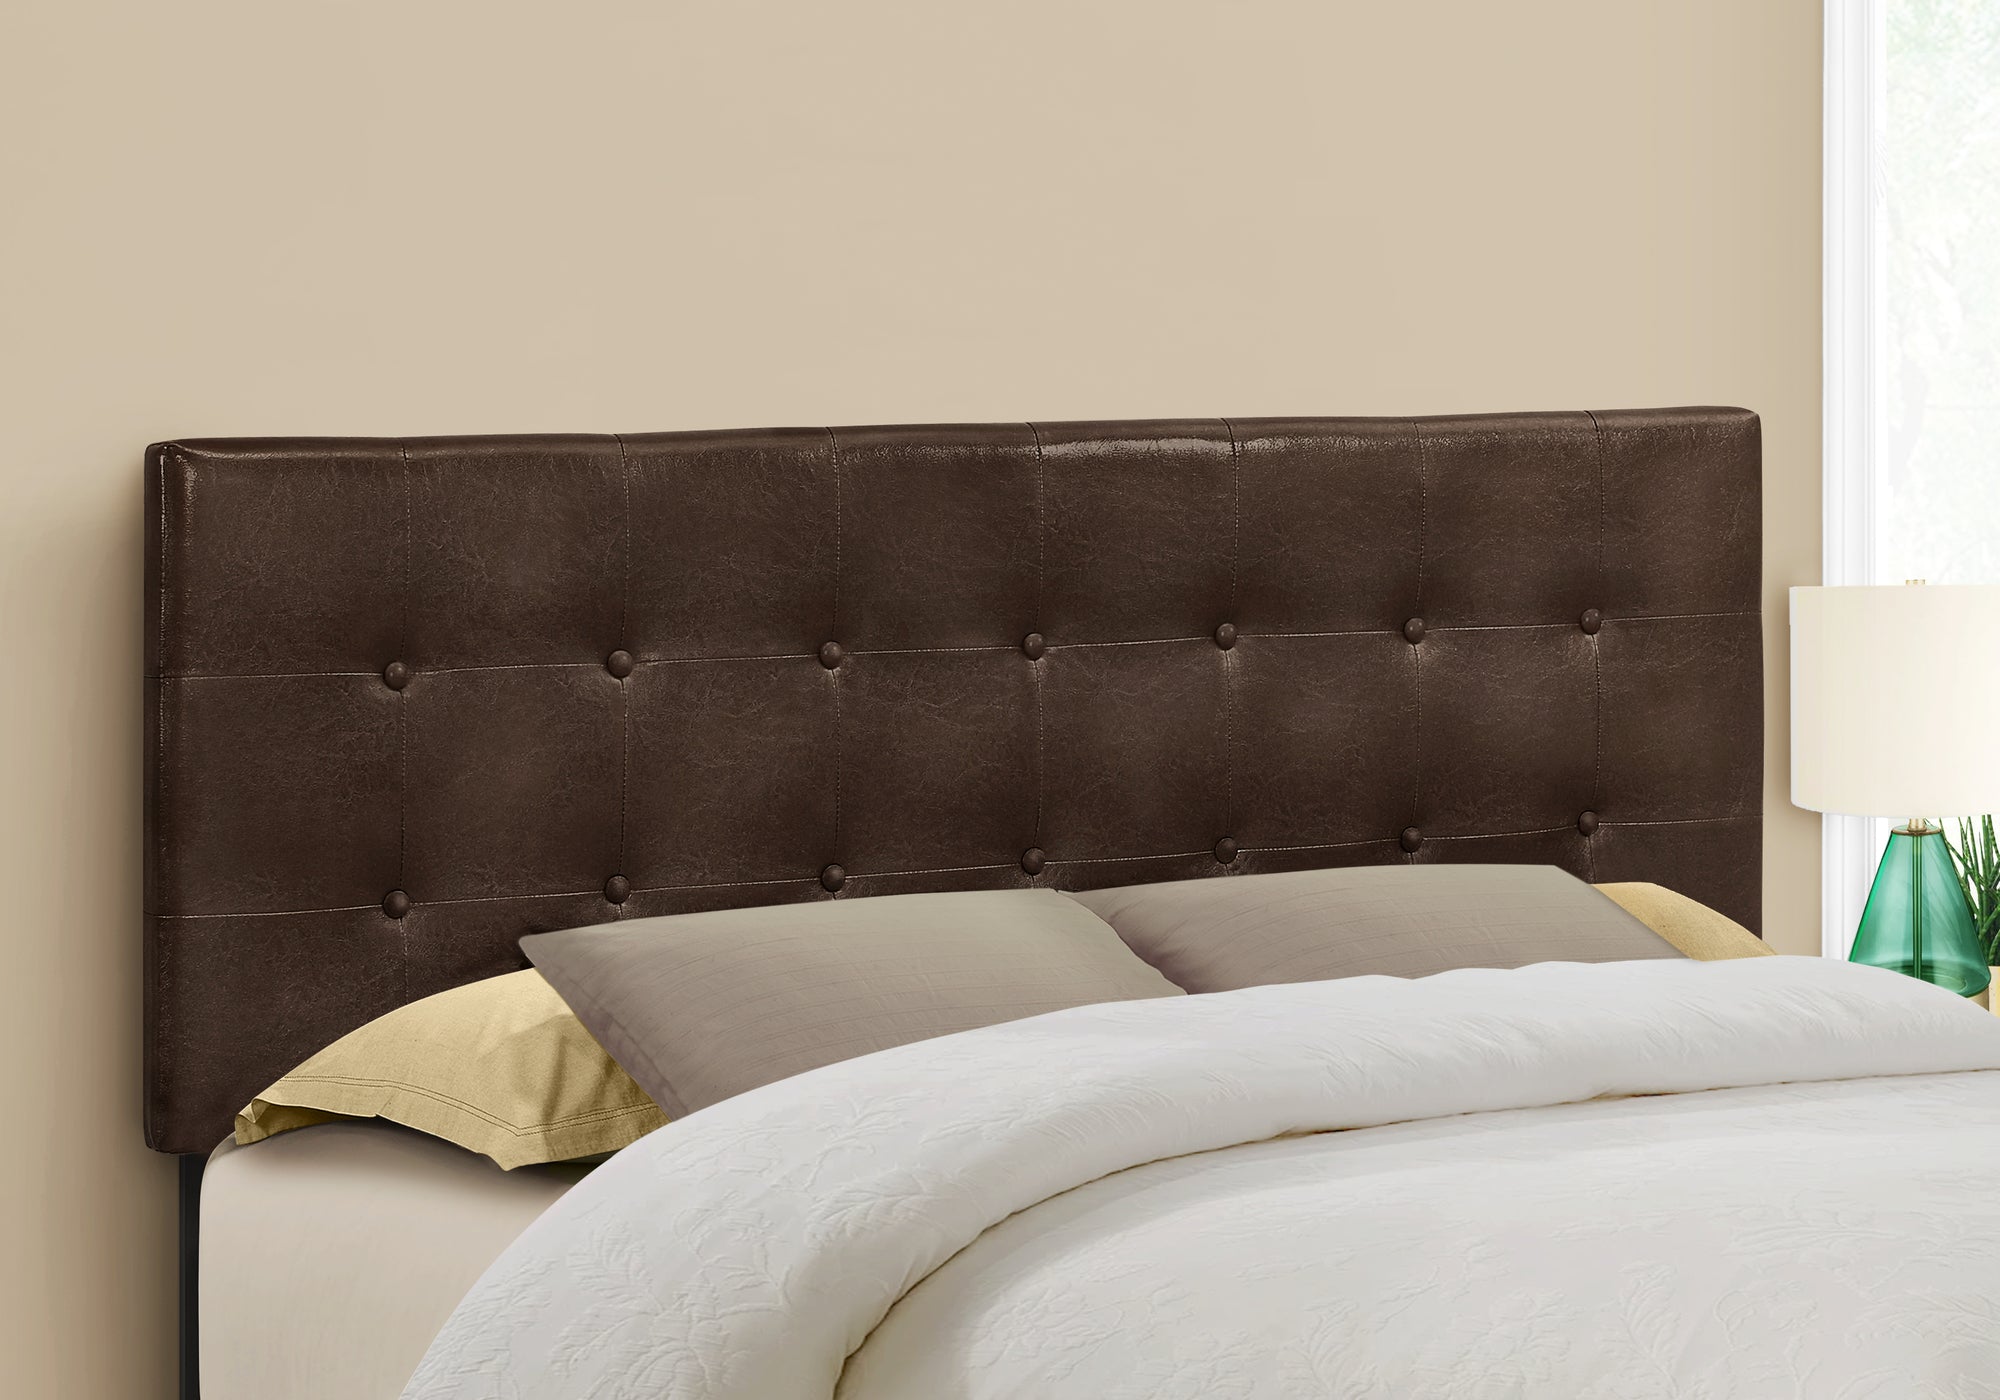 bed queen size brown leather look headboard only i6000q